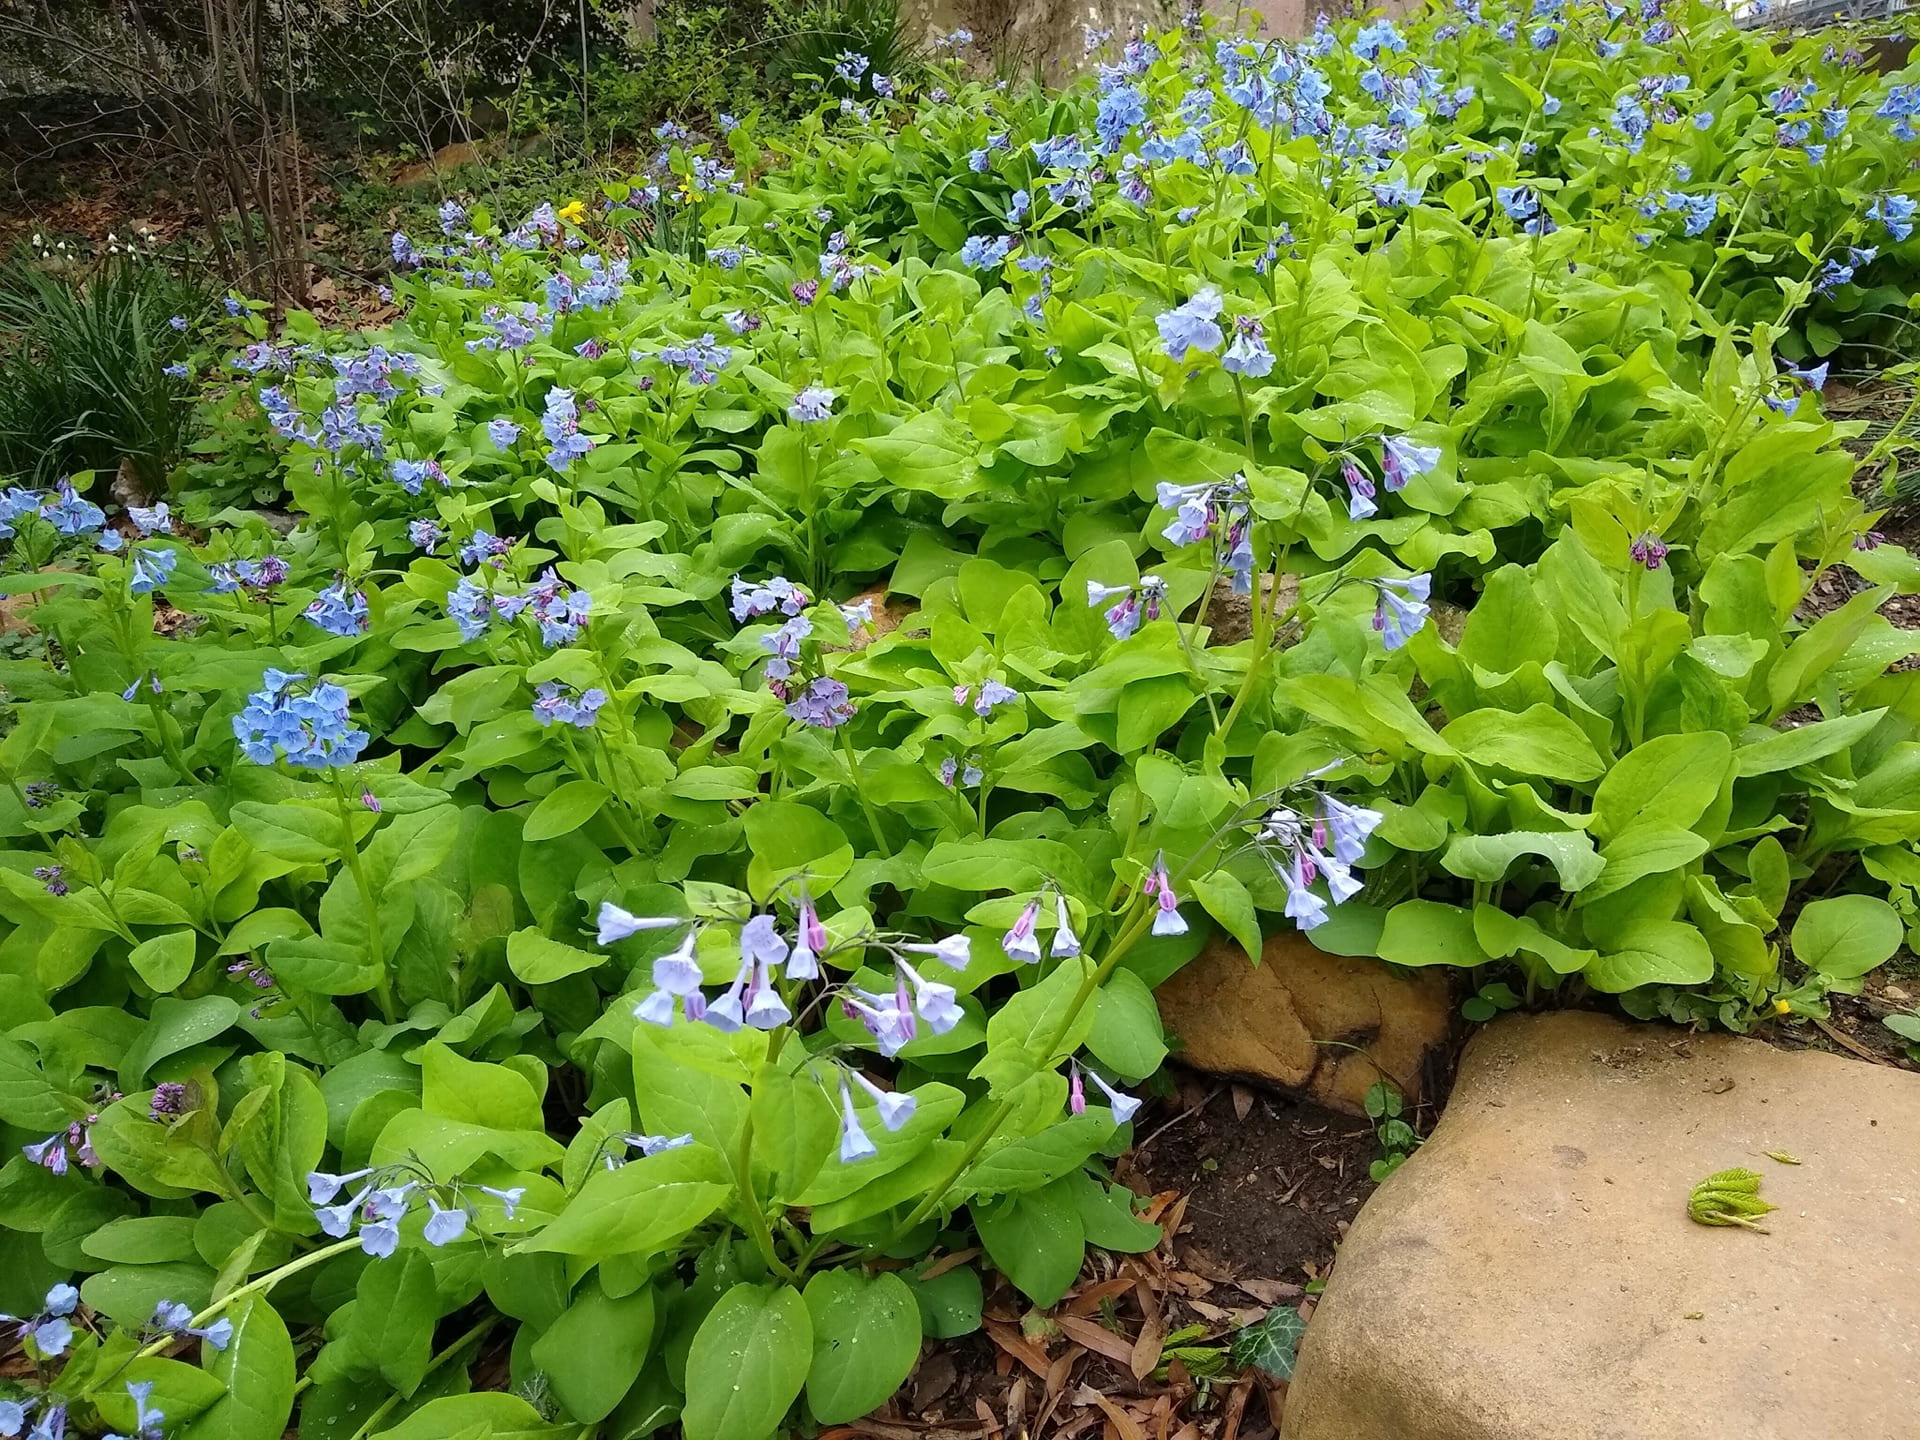 Mertensia virginica cascades down a hill side at the pond.